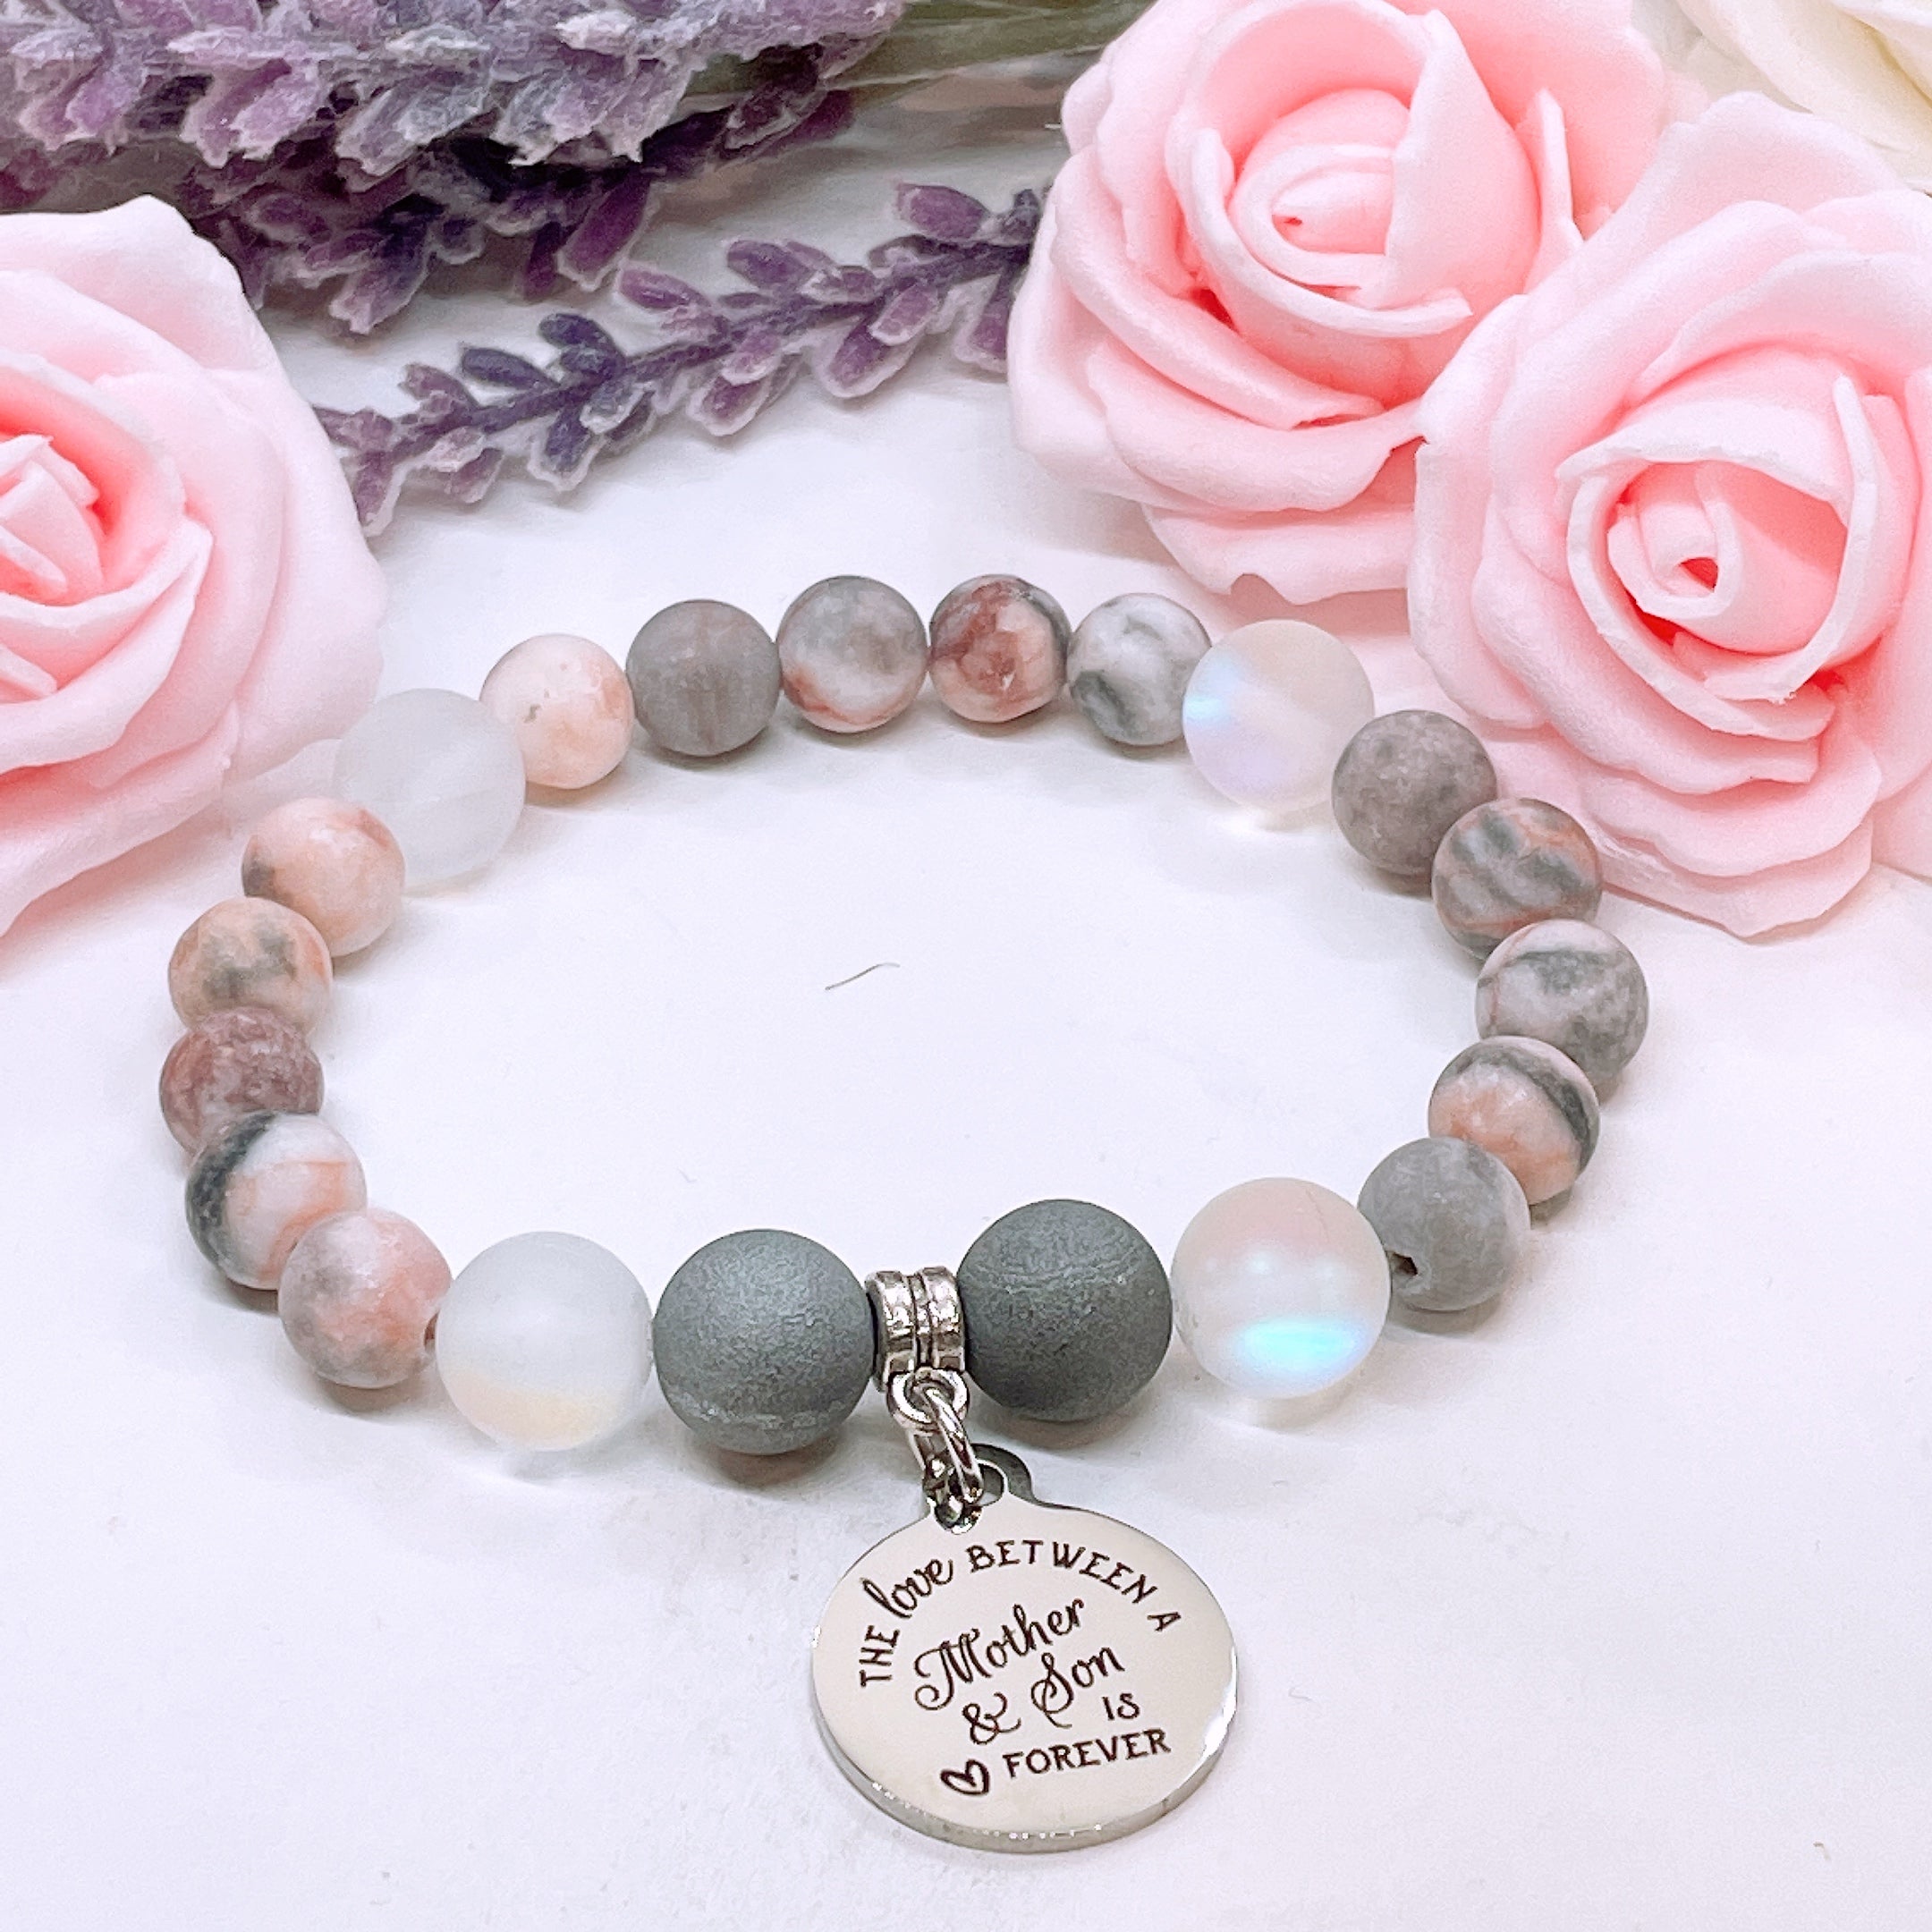 The Love Between a Mother and her Son is Forever Charm Bracelet